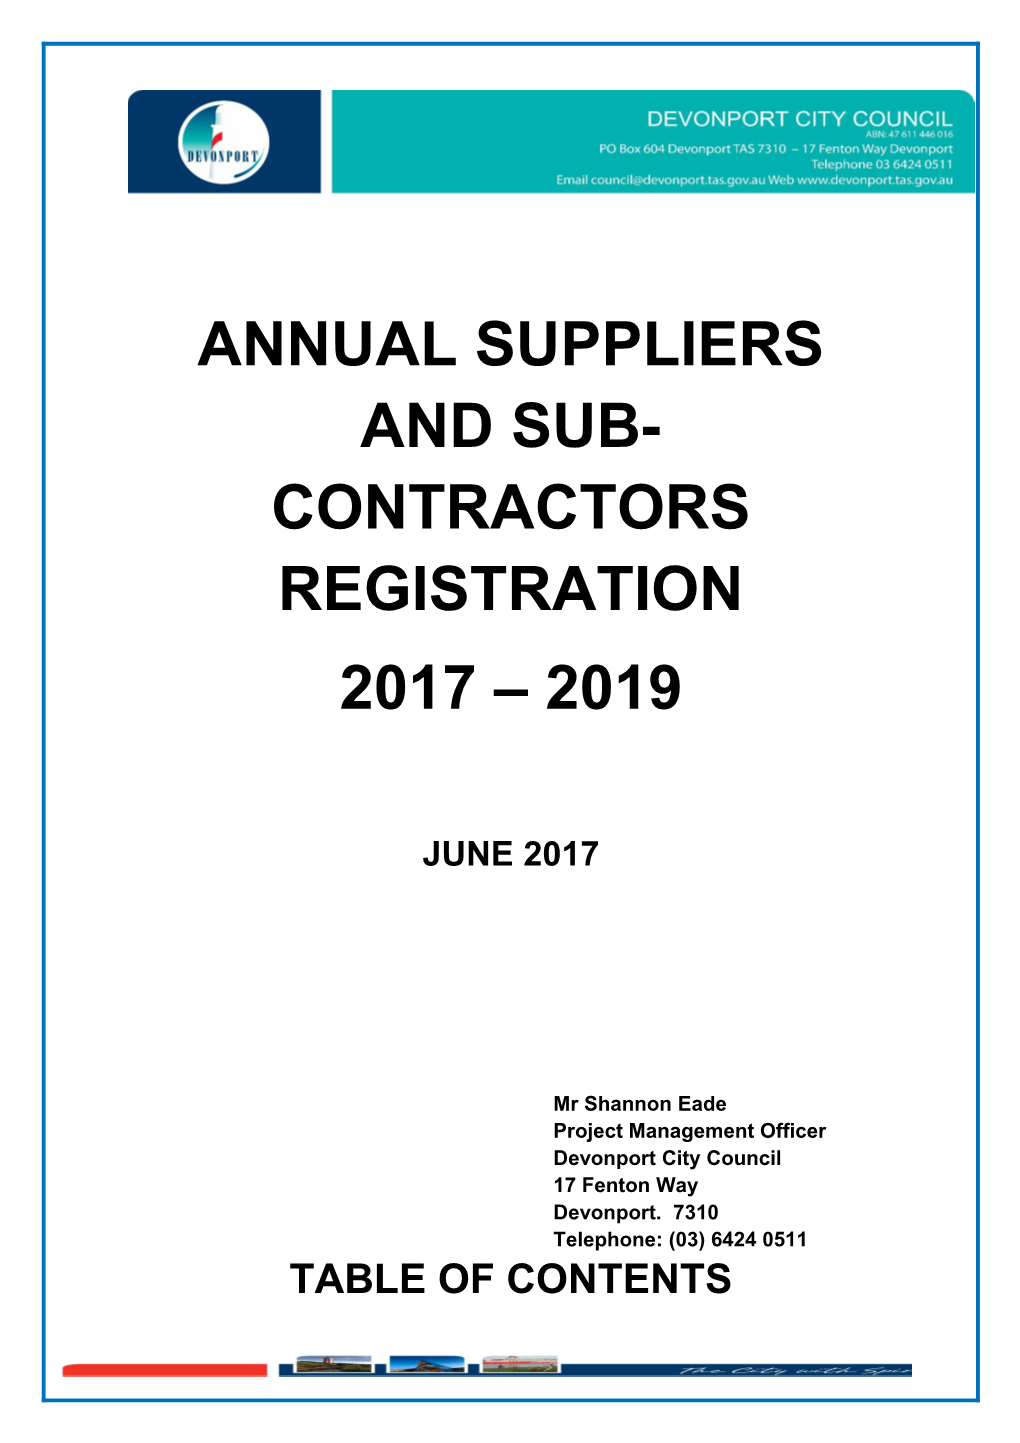 Annual Suppliers and Sub-Contractors Registration